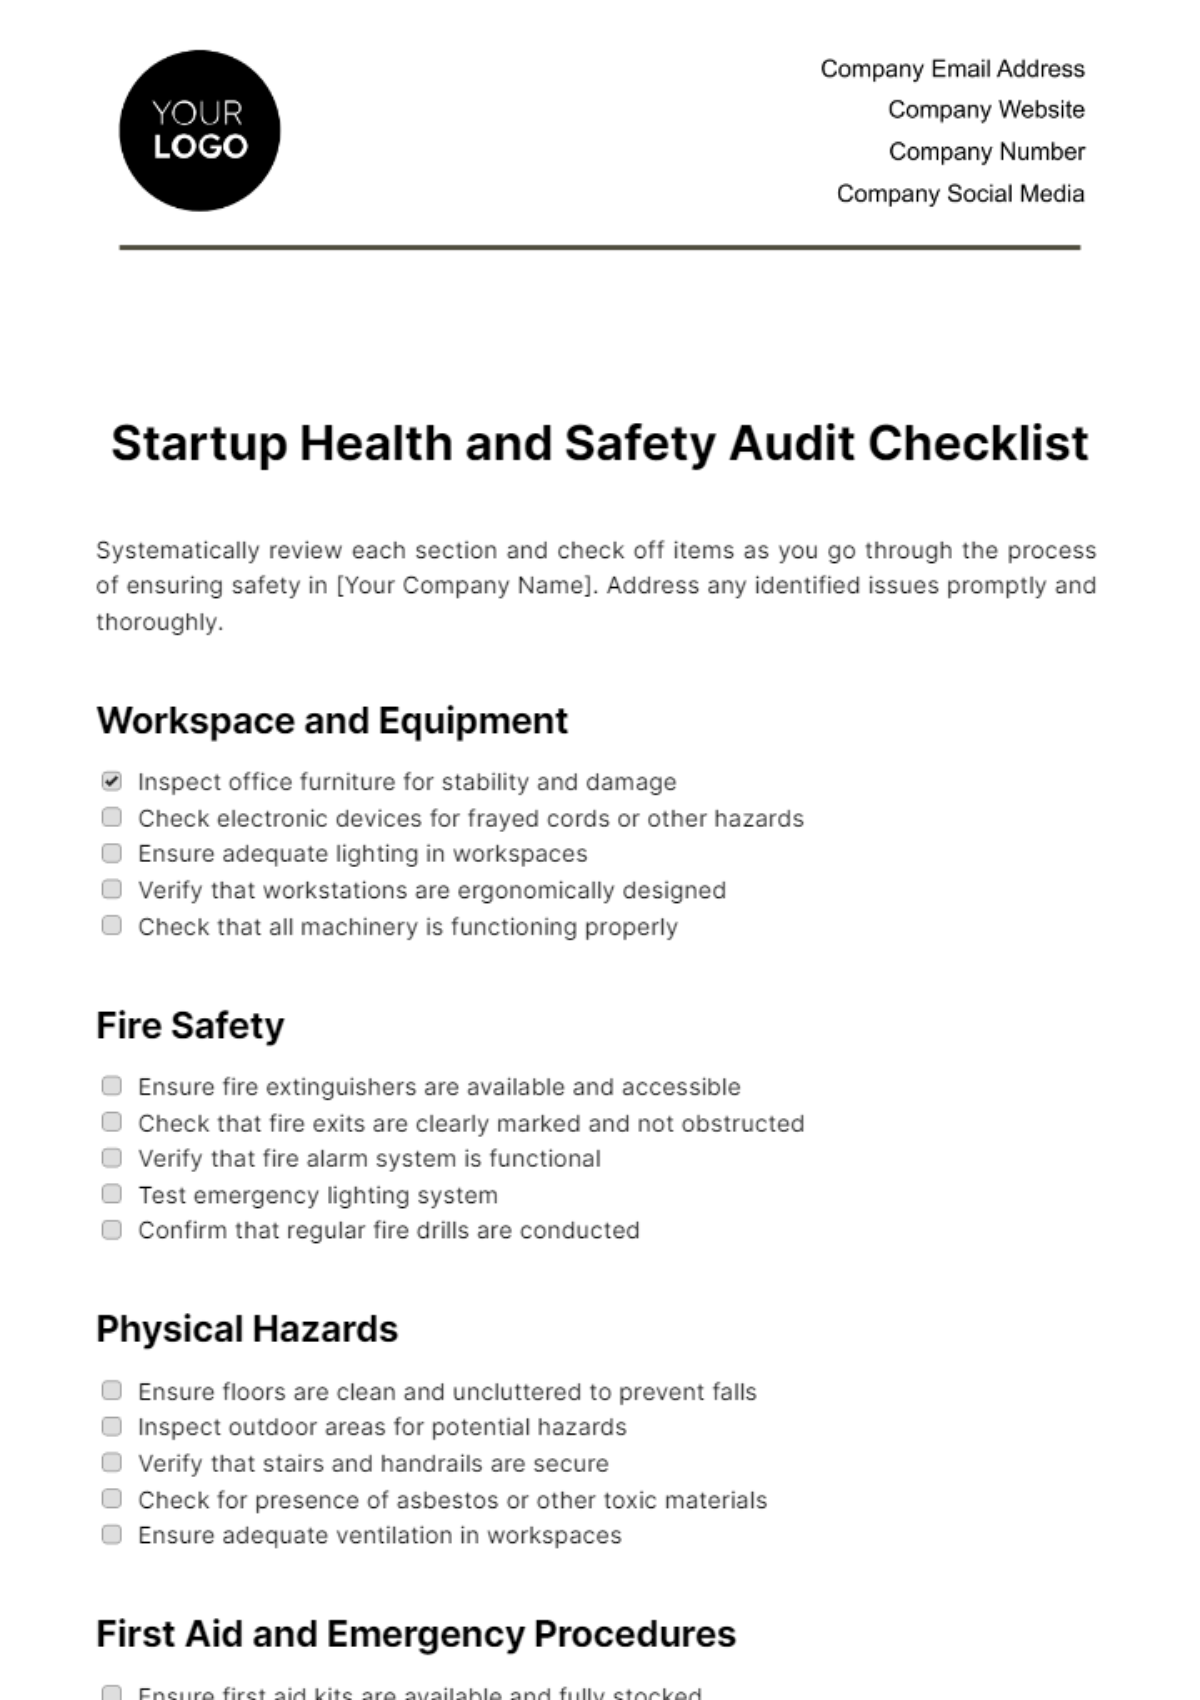 Free Startup Health and Safety Audit Checklist Template